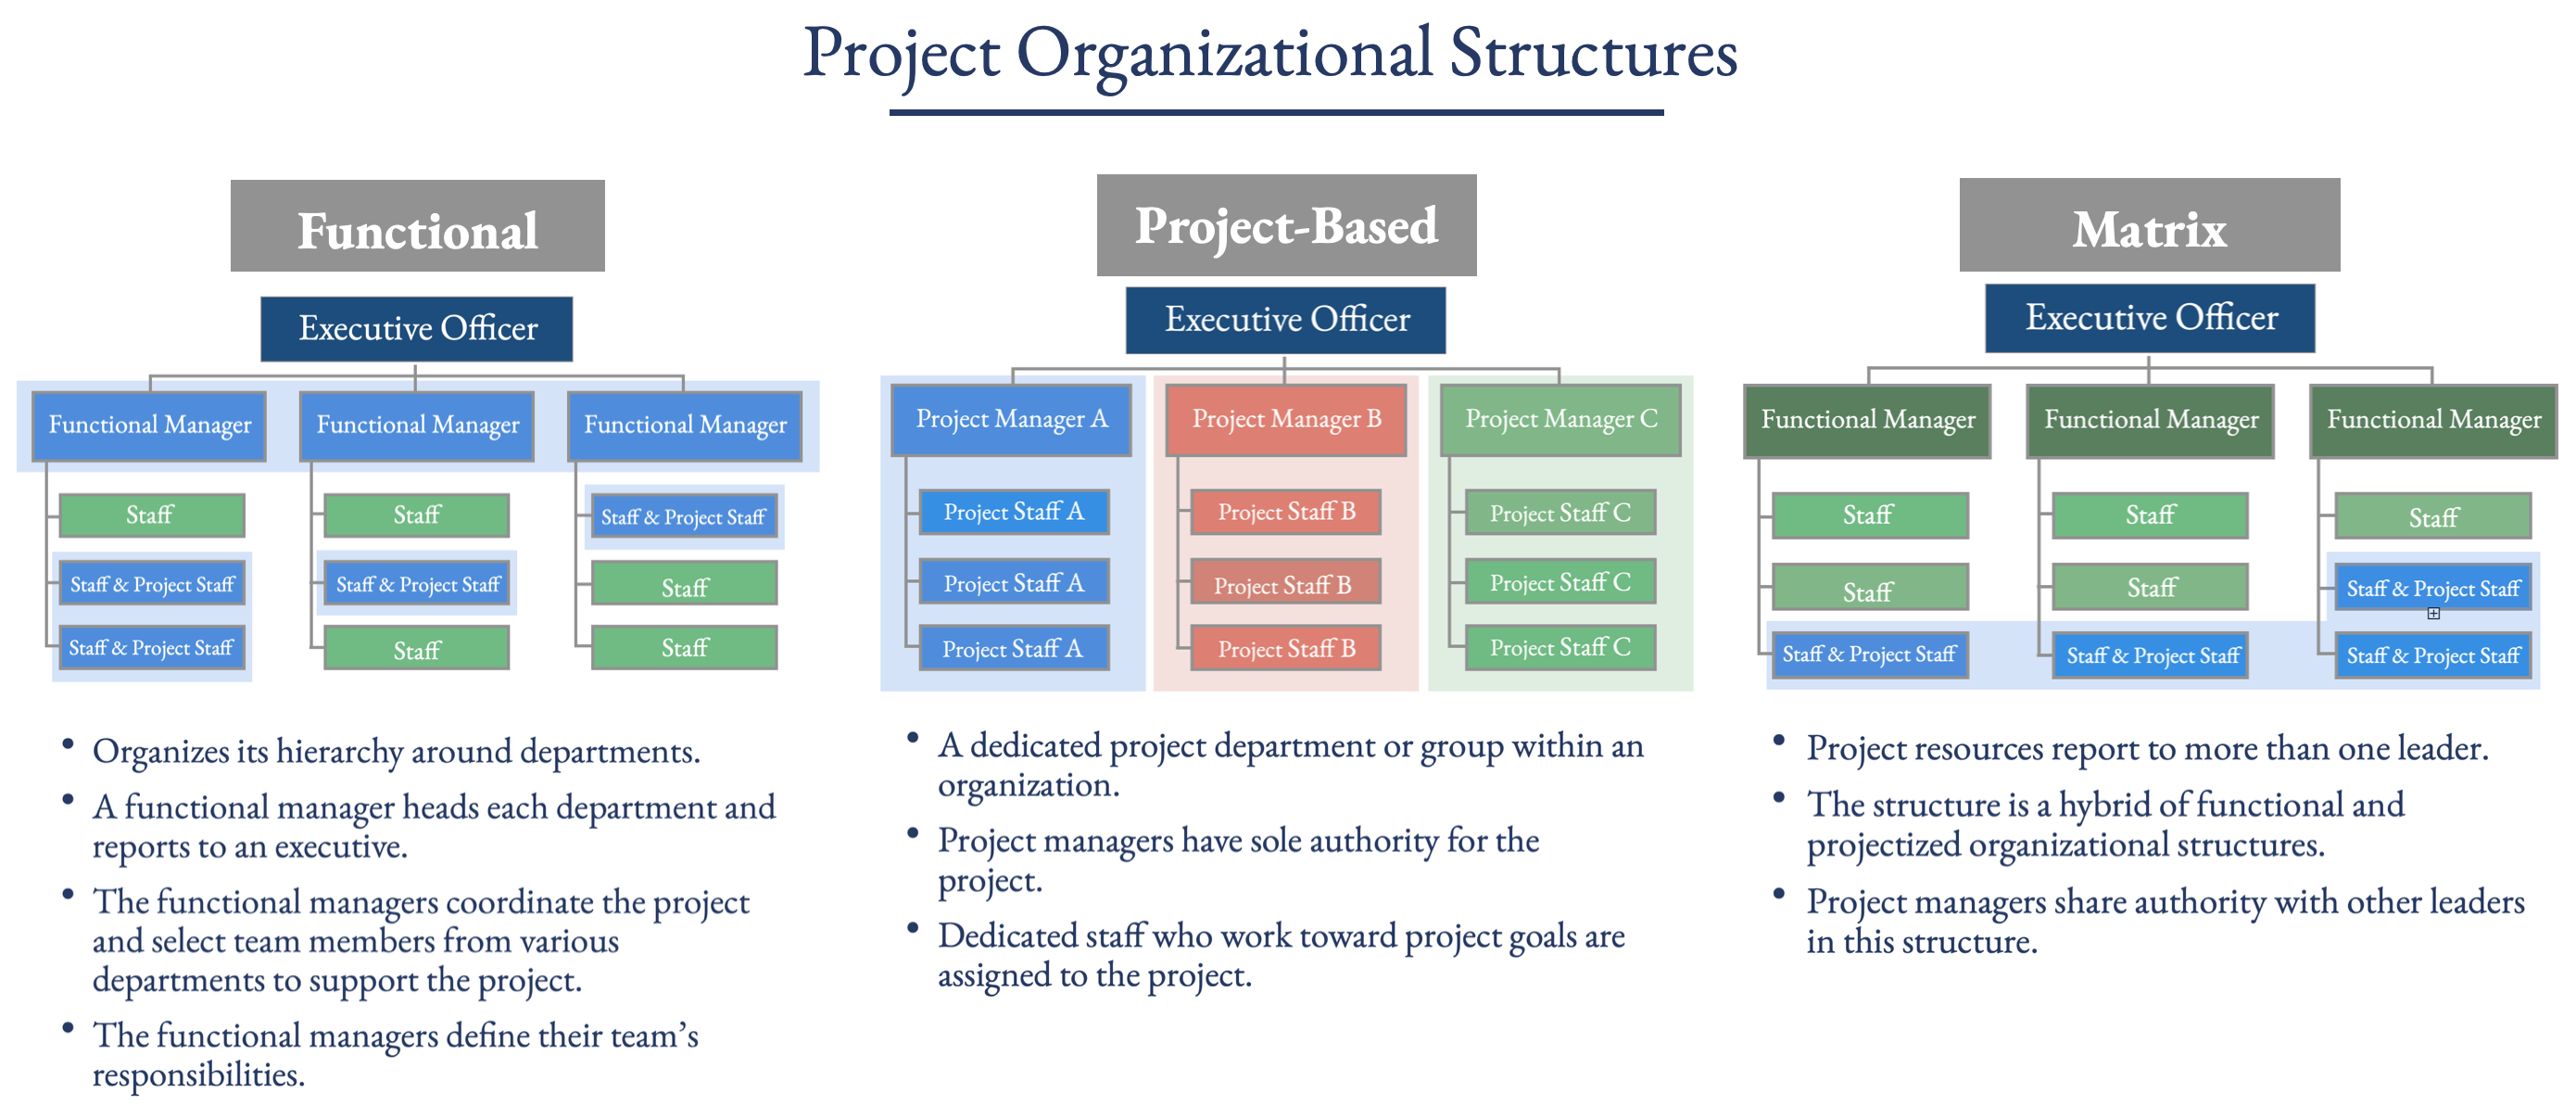 SAP Project Organizational Structures Chart